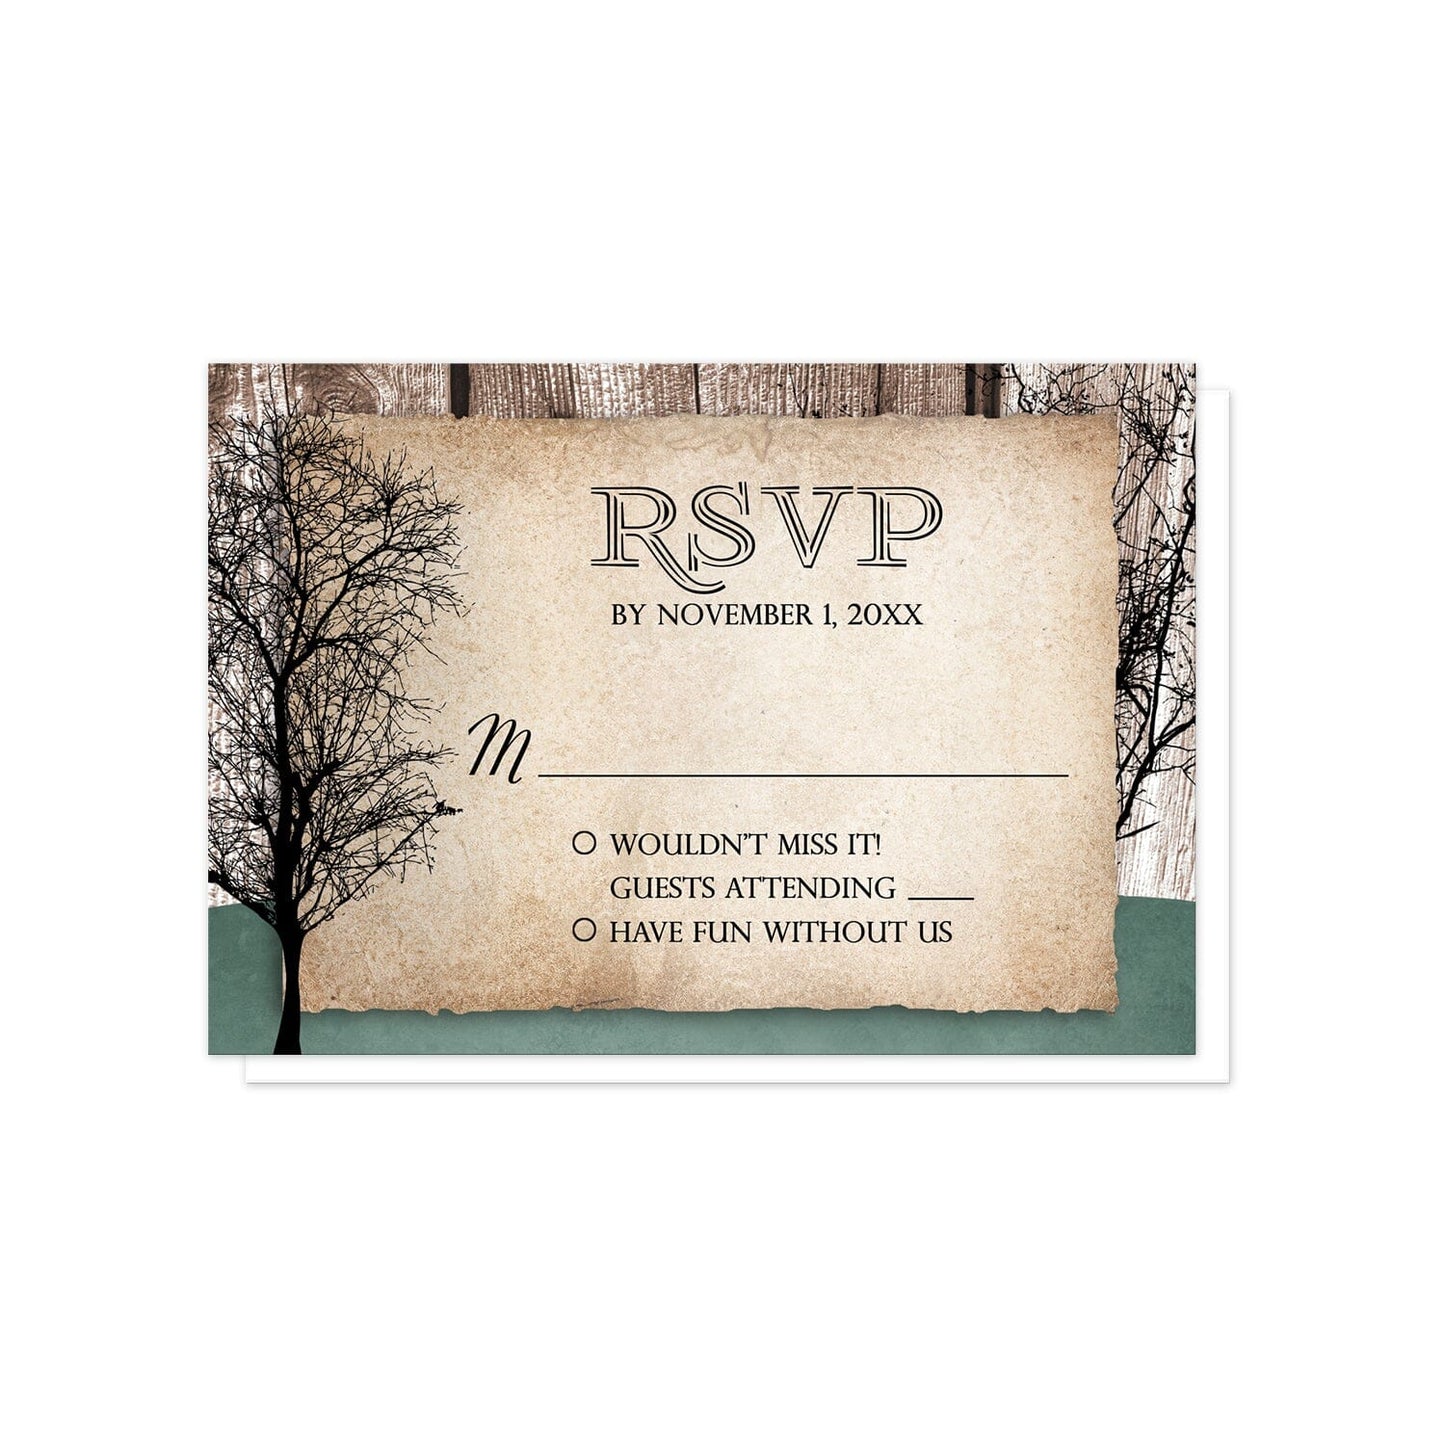 Rustic Woodsy Deer RSVP Cards at Artistically Invited. Rustic woodsy deer reception only invitations designed with silhouettes of a buck deer with antlers, a doe, and winter trees over a wood brown background and a faded hunter green design along the bottom. Your personalized RSVP date details are custom printed in black over a tattered rustic paper illustration between the deer.